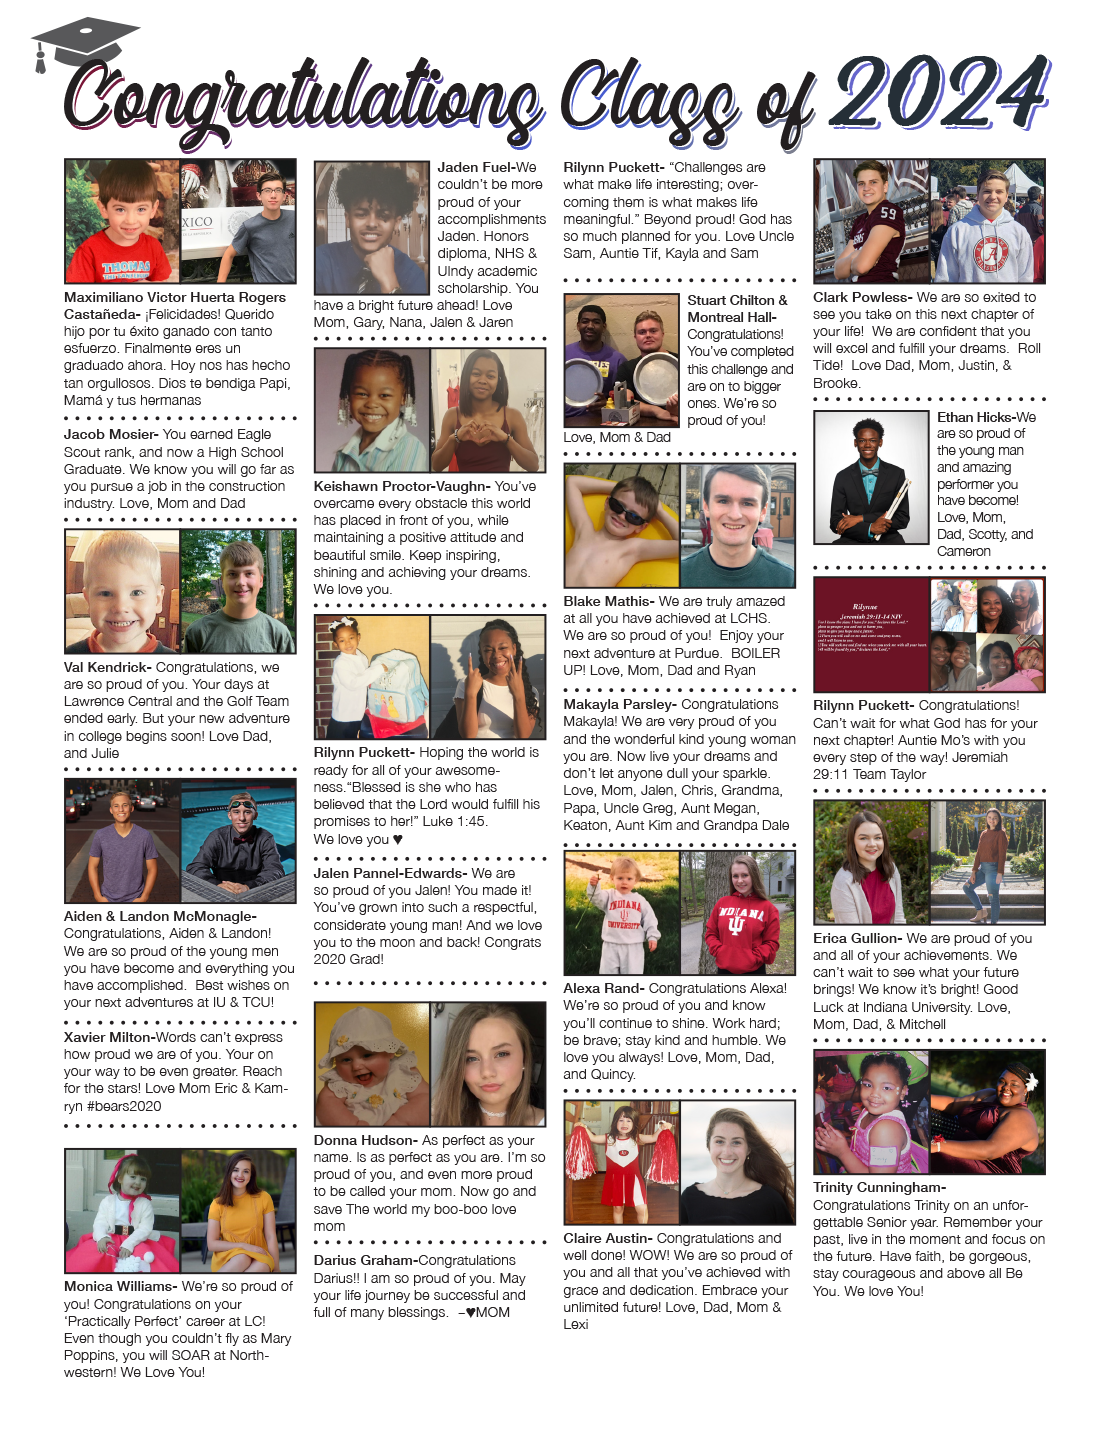 Boone County Magazine Senior Shout Out